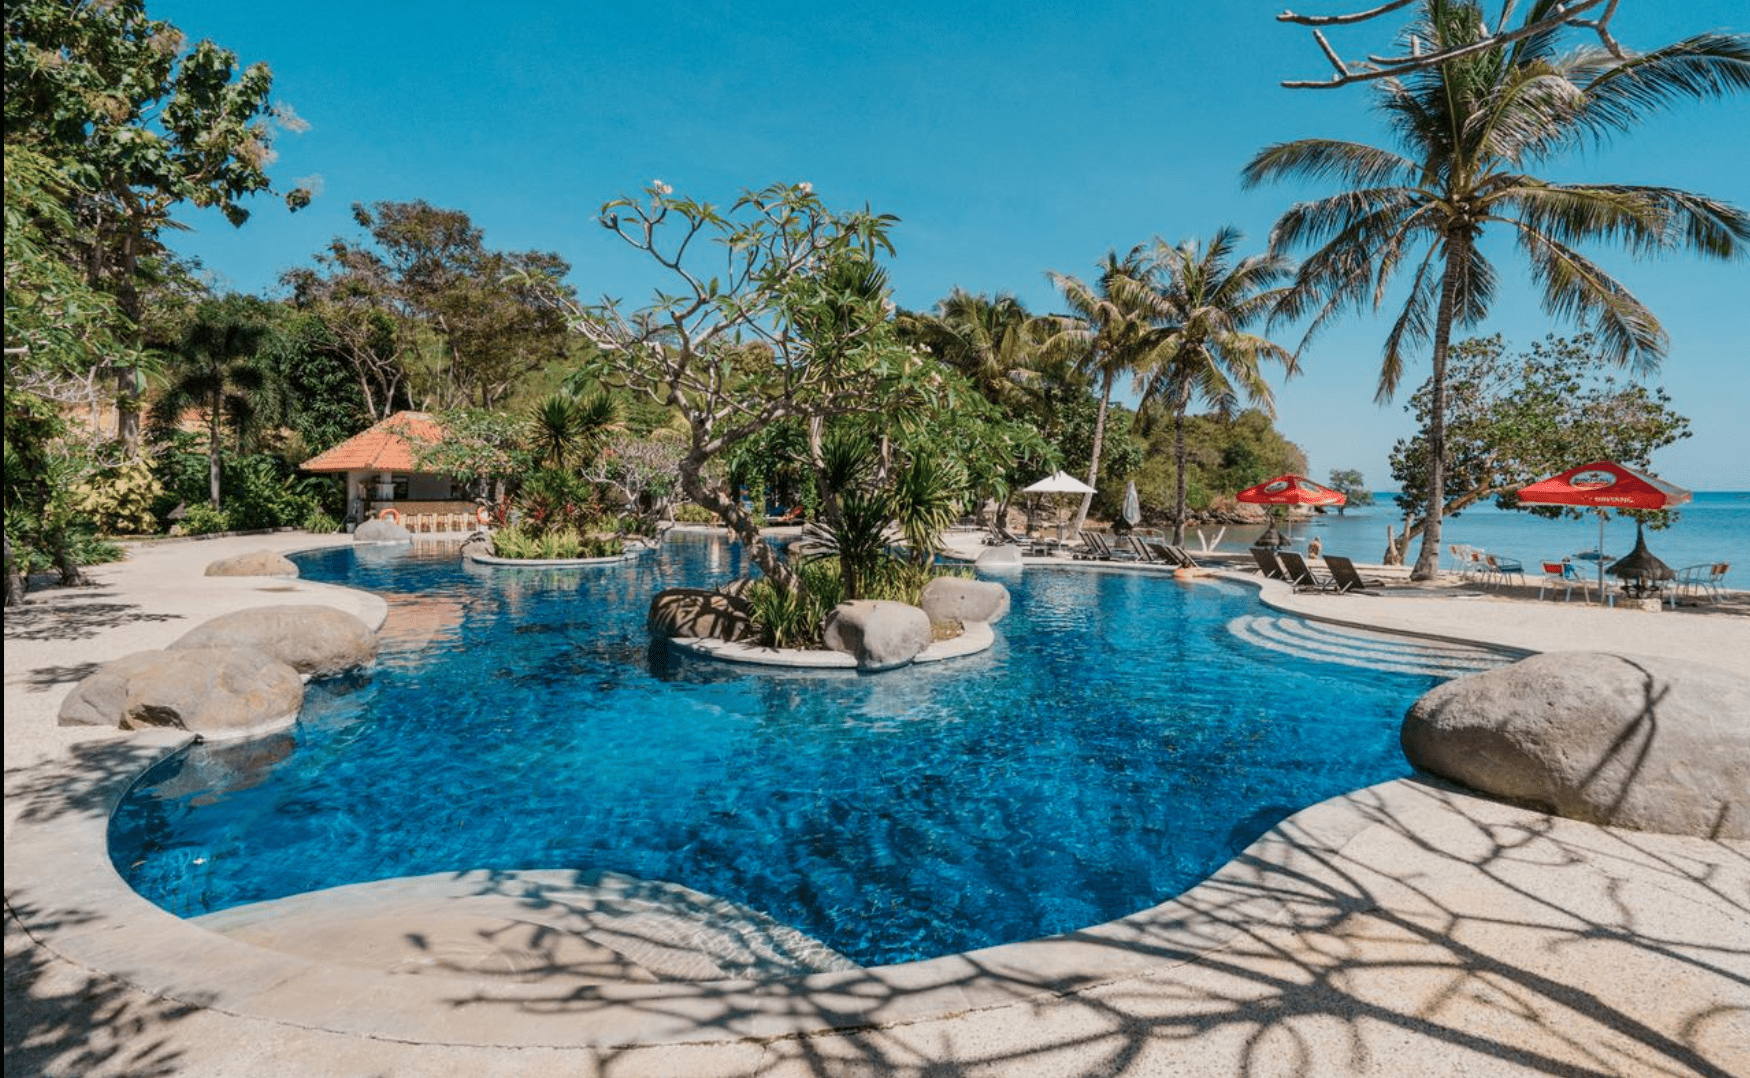 Where to stay in Komodo